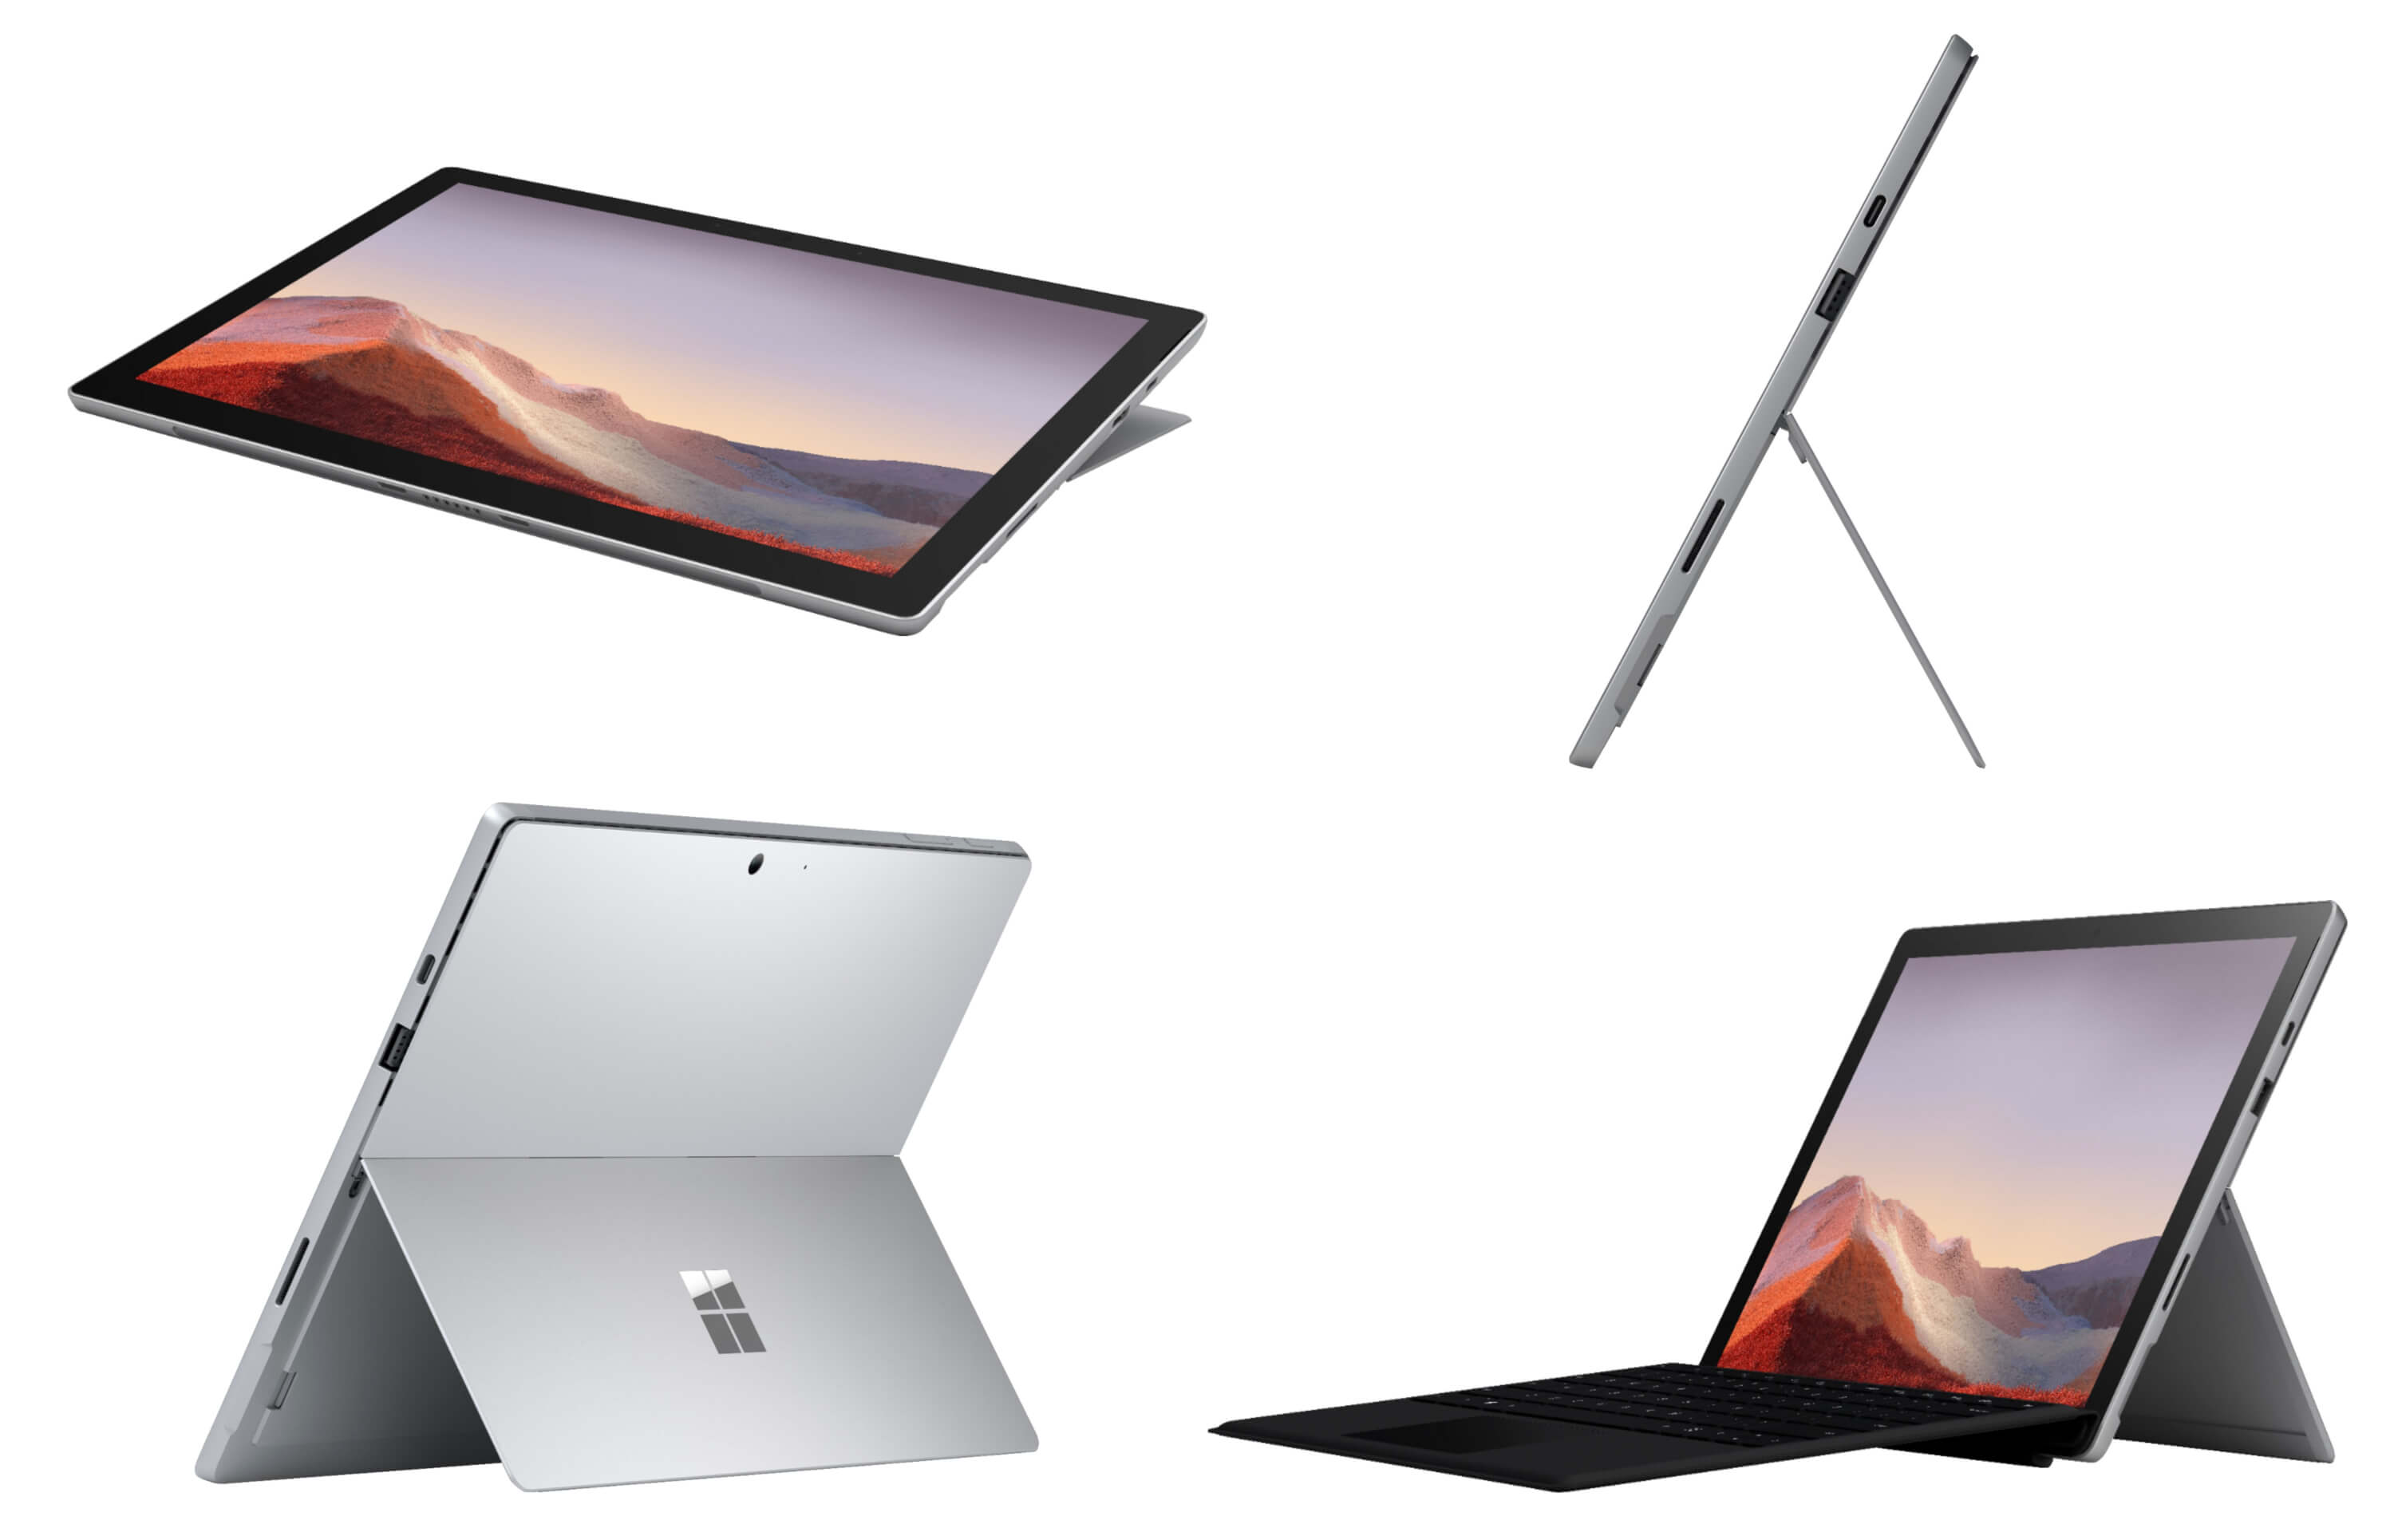 Microsoft's Surface Pro 7, Surface Laptops, and ARM-powered Surface leak ahead of official reveal